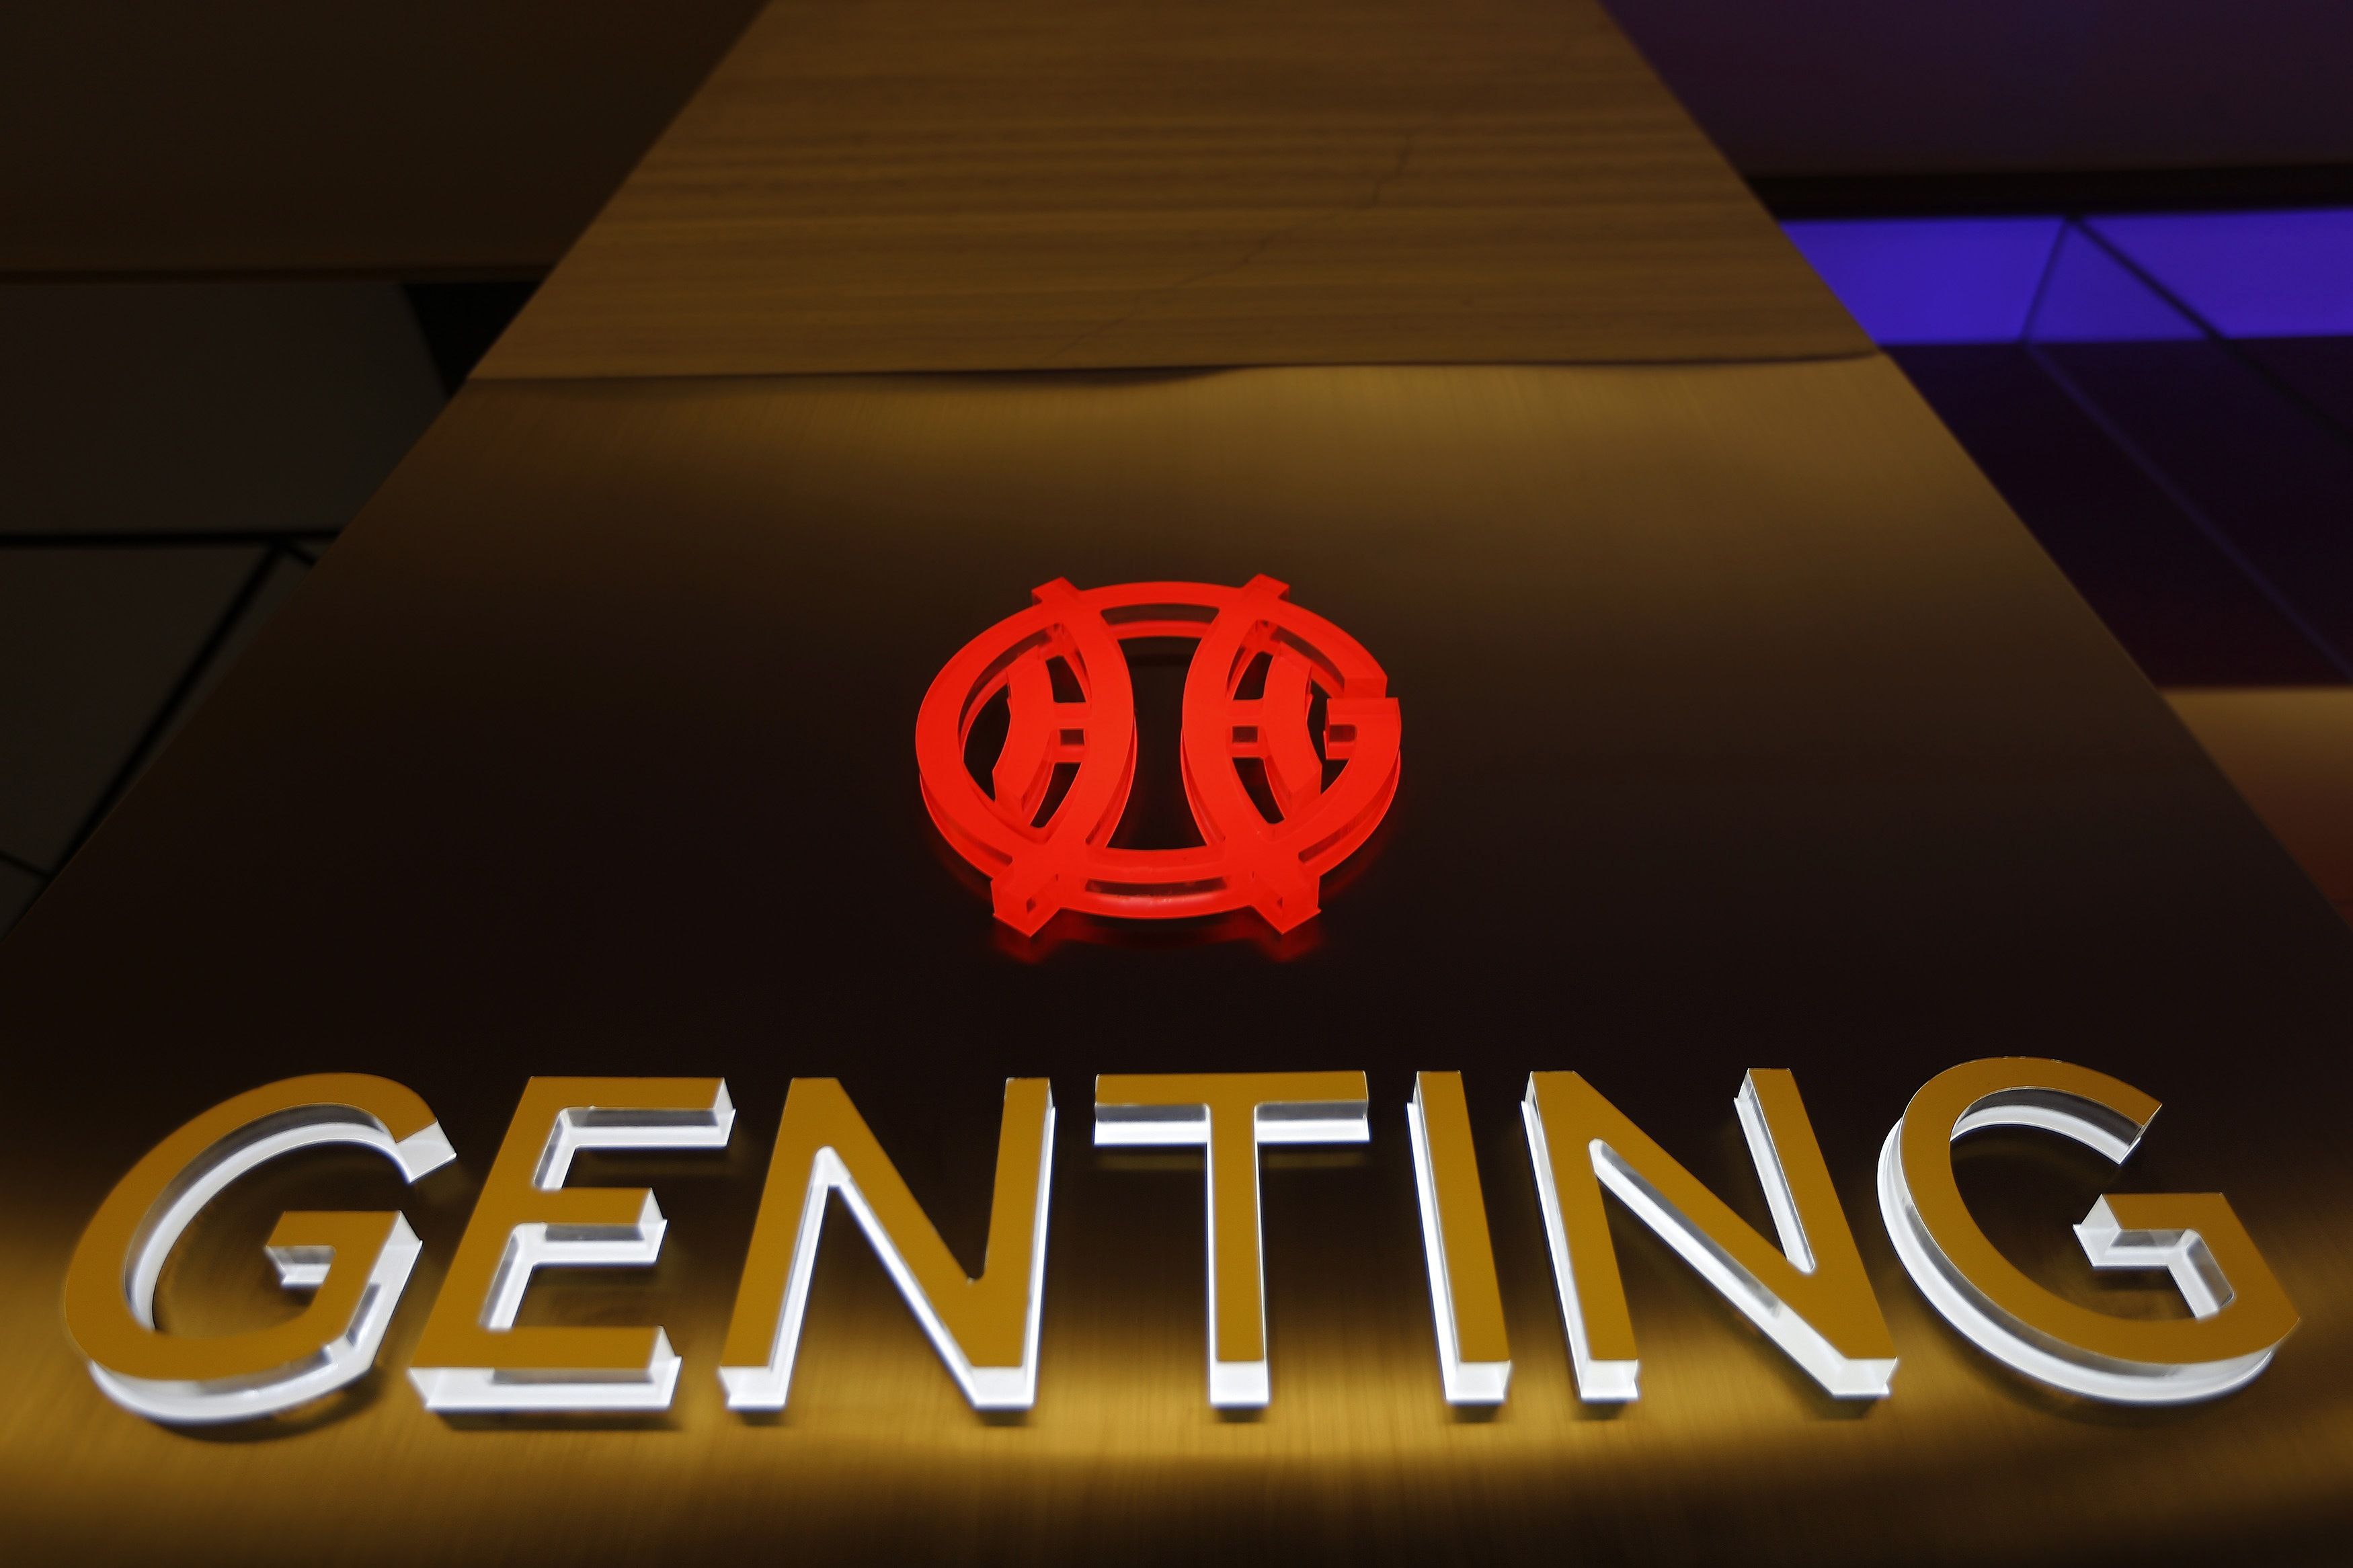 Genting Group Wynn Resorts acquisition